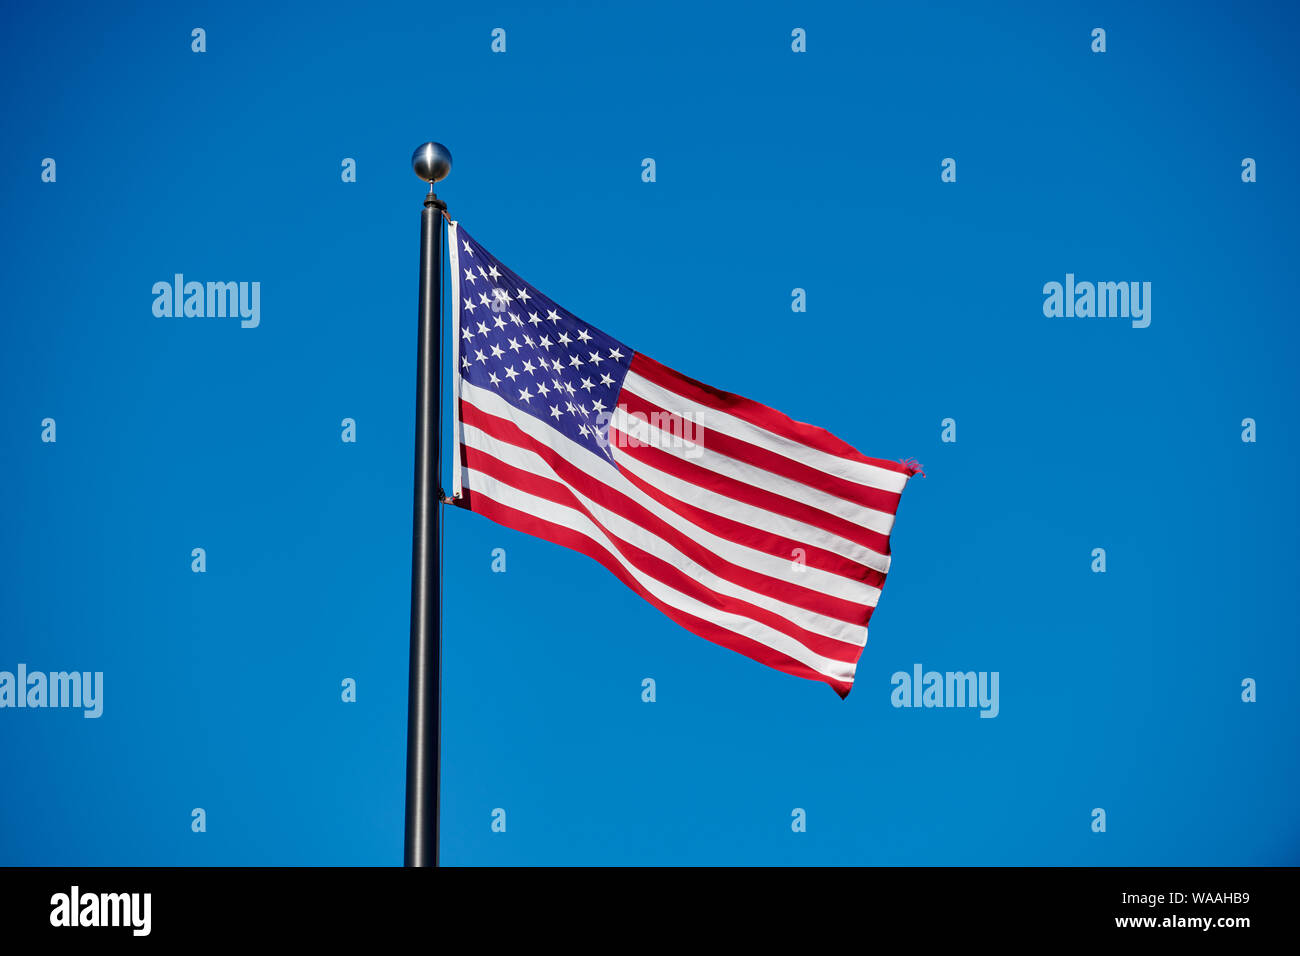 star spangled banner, national Flag of USA blowing in the wind, North America Stock Photo